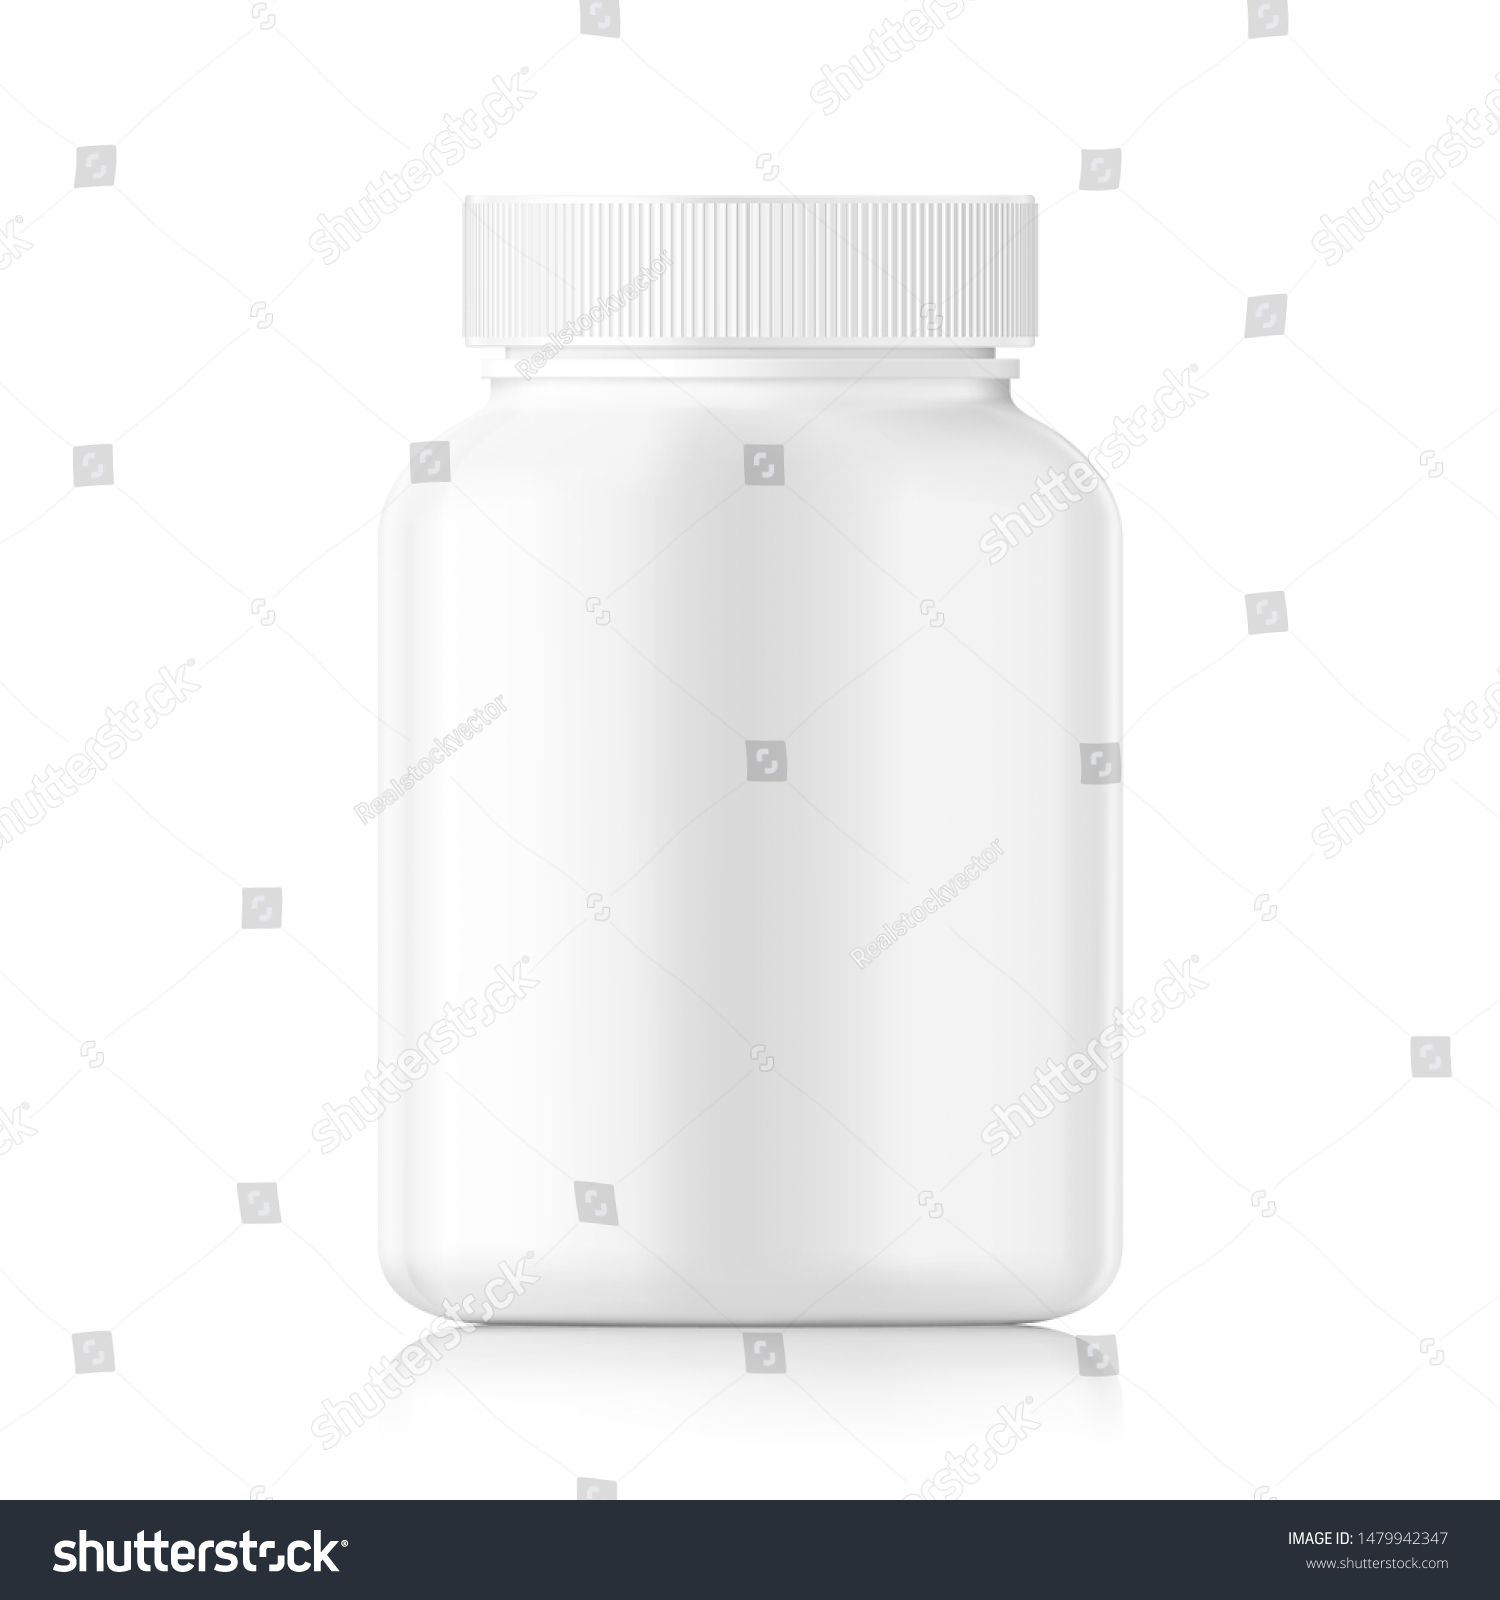 SVG of Plastic bottle mockup isolated on white background. Can be used for medical, cosmetic. Vector illustration. EPS10.	 svg